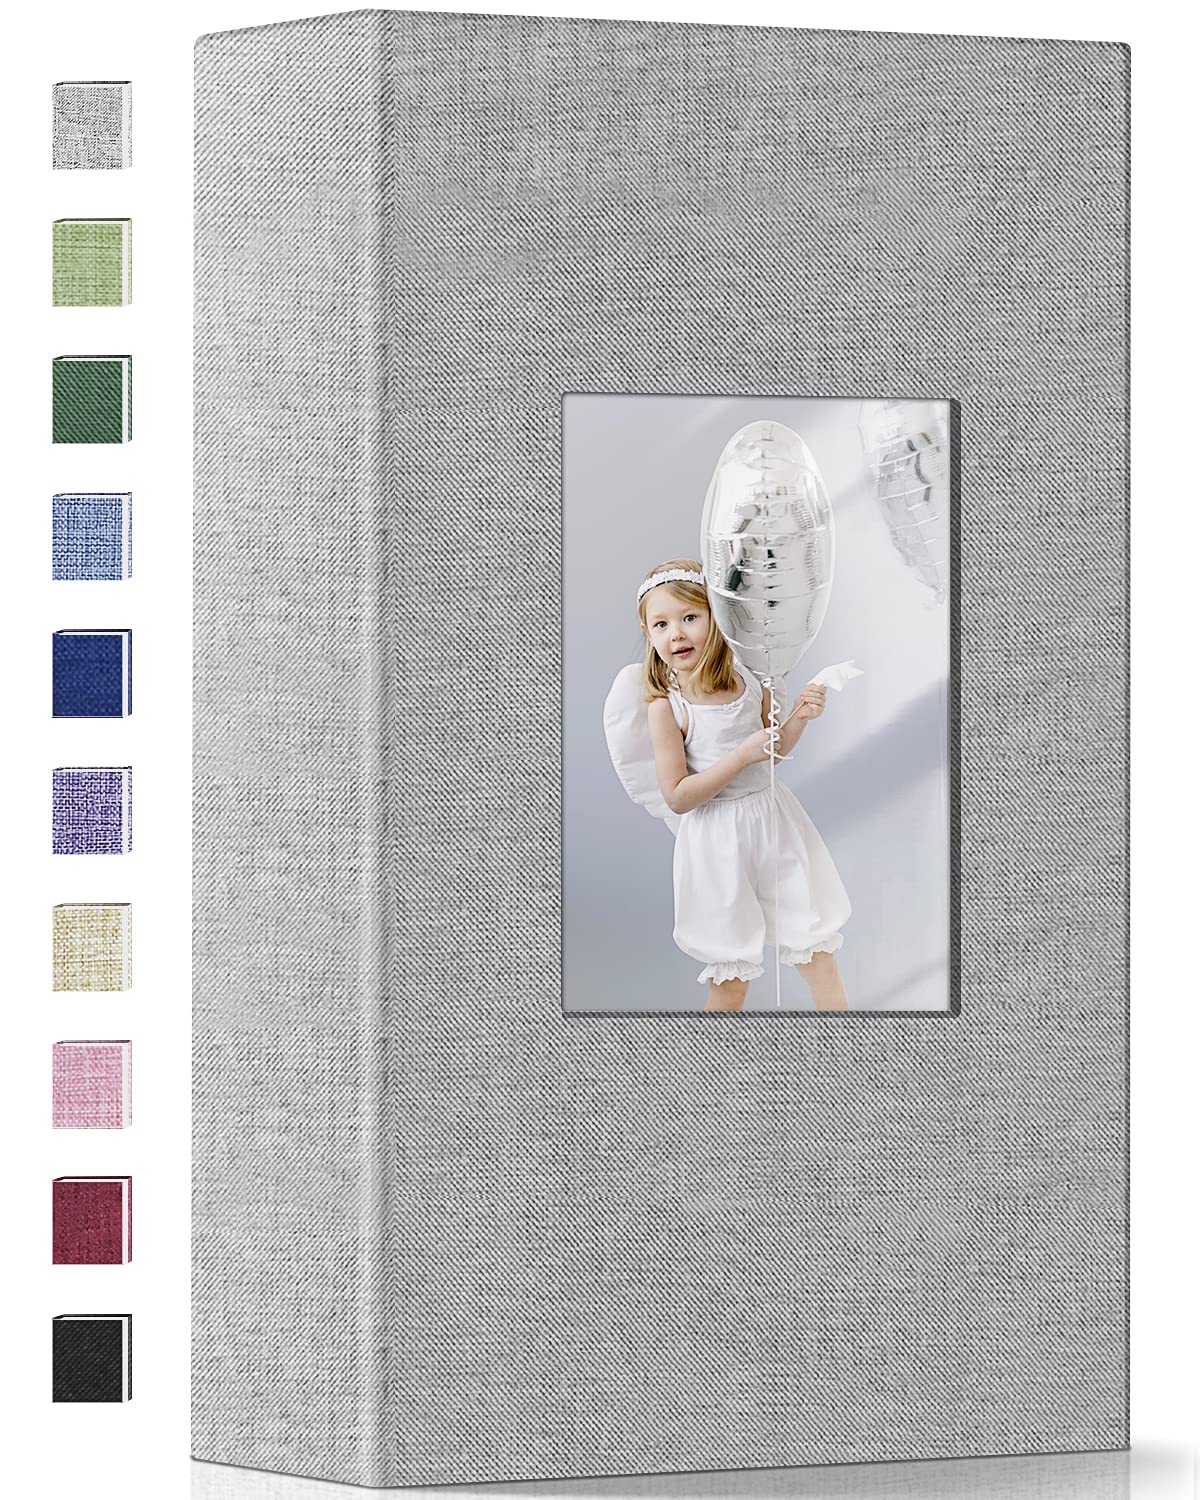 MSTONAL 4x6 Photo Albums, Linen Cover Photo Album Holds 300 Pockets, Grey  Picture Albums for 4x6 Photos, Slip-in Photo Books for Family Valentine